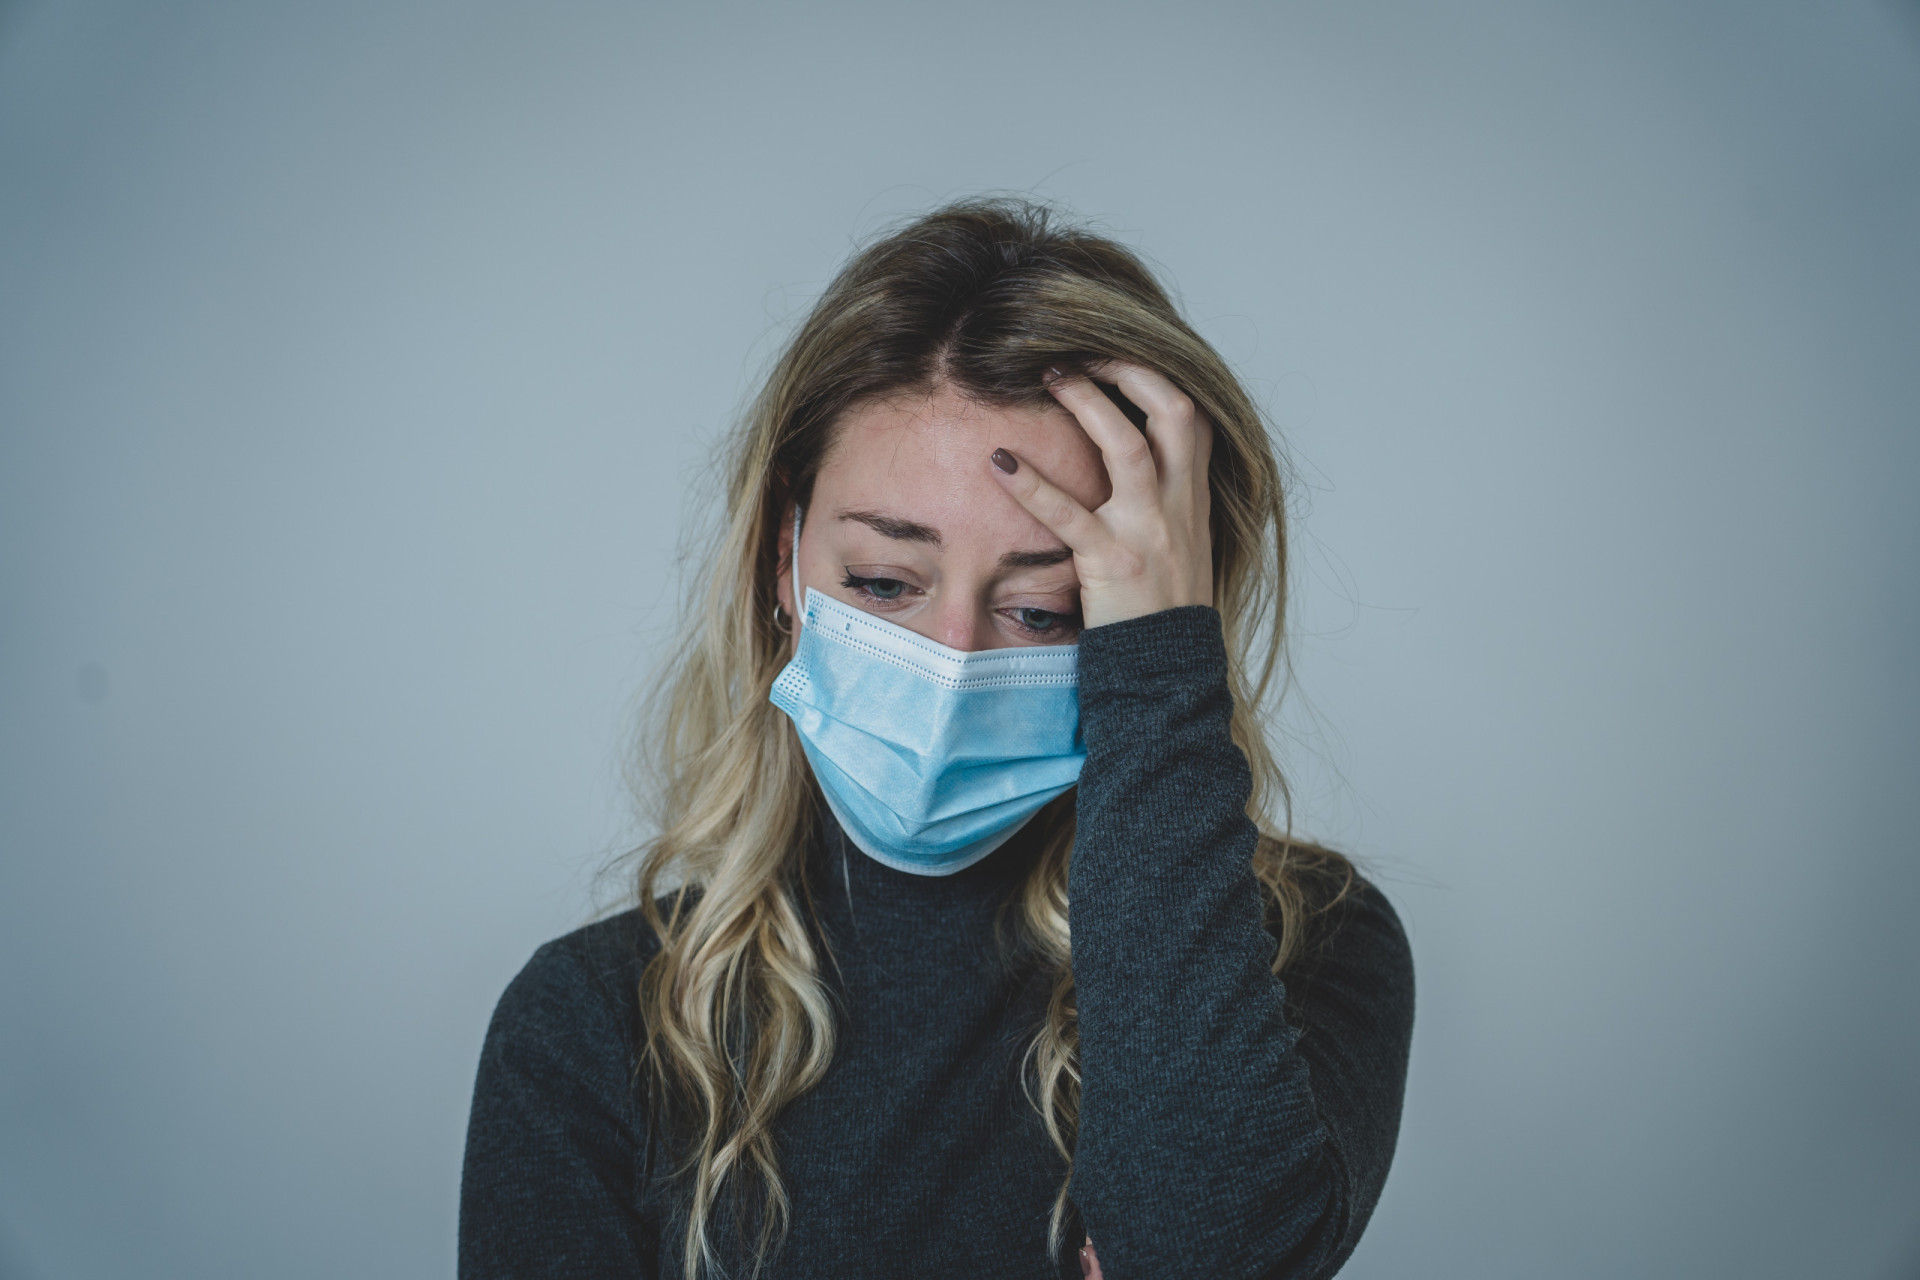 <p>It's safe to say that no one likes to be sick, so it's natural for us to have a healthy degree of fear and <a href="https://www.starsinsider.com/health/526337/the-most-common-things-that-cause-anxiety" rel="noopener">anxiety</a> about it. Some people, however, do suffer from a mental health disorder that exacerbates this fear and manifests in unhealthy ways. We're talking about illness anxiety disorder (IAD), also known as hypochondriasis or hypochondria. Indeed, having an irrational fear of being, or becoming, ill can really have a negative impact on one's life.</p> <p>In this gallery, we explain what illness anxiety disorder really is, as well as its symptoms, risk factors, and possible treatments. Click on to learn all about IAD.</p><p>You may also like:<a href="https://www.starsinsider.com/n/97640?utm_source=msn.com&utm_medium=display&utm_campaign=referral_description&utm_content=648489en-us"> Are you seeing double? Meet these identical celeb look-alikes!</a></p>